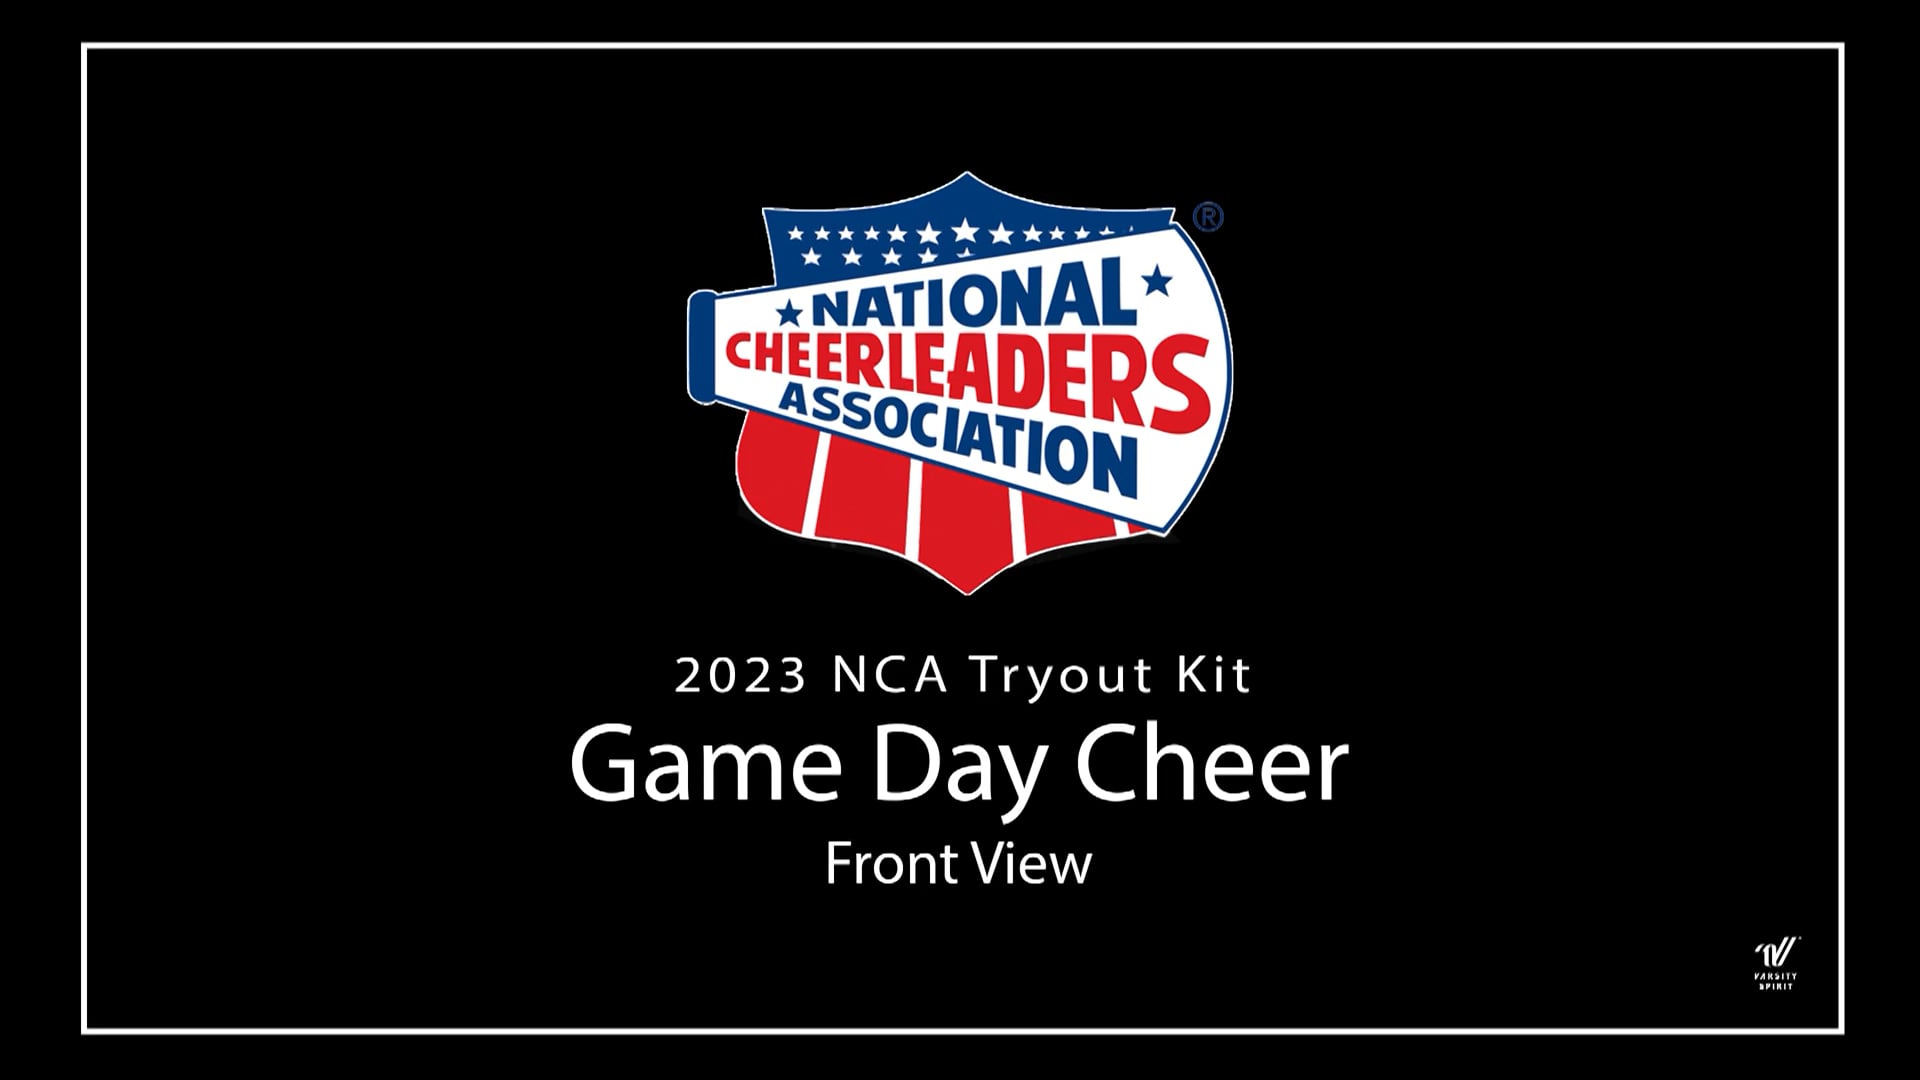 2023 NCA Tryout Kit Game Day Cheer Front View on Vimeo